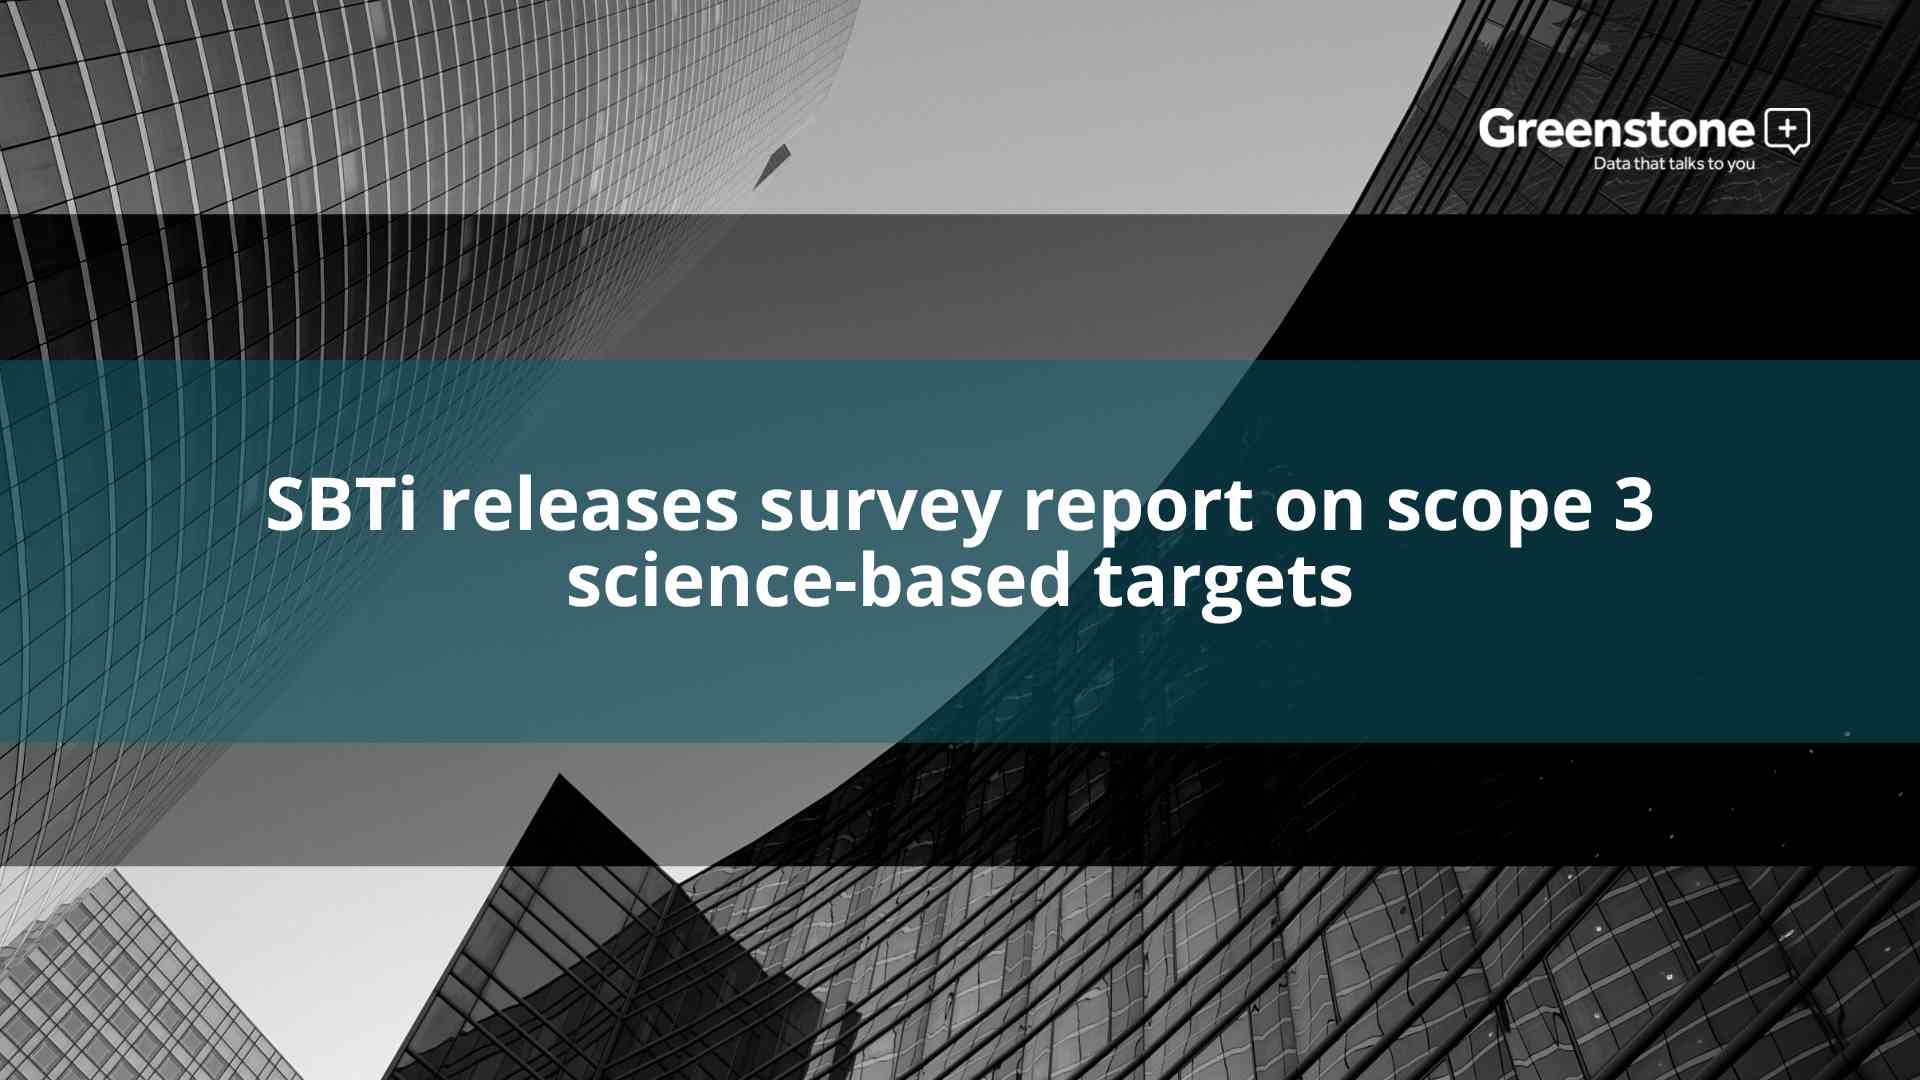 SBTi releases survey report on scope 3 science-based targets